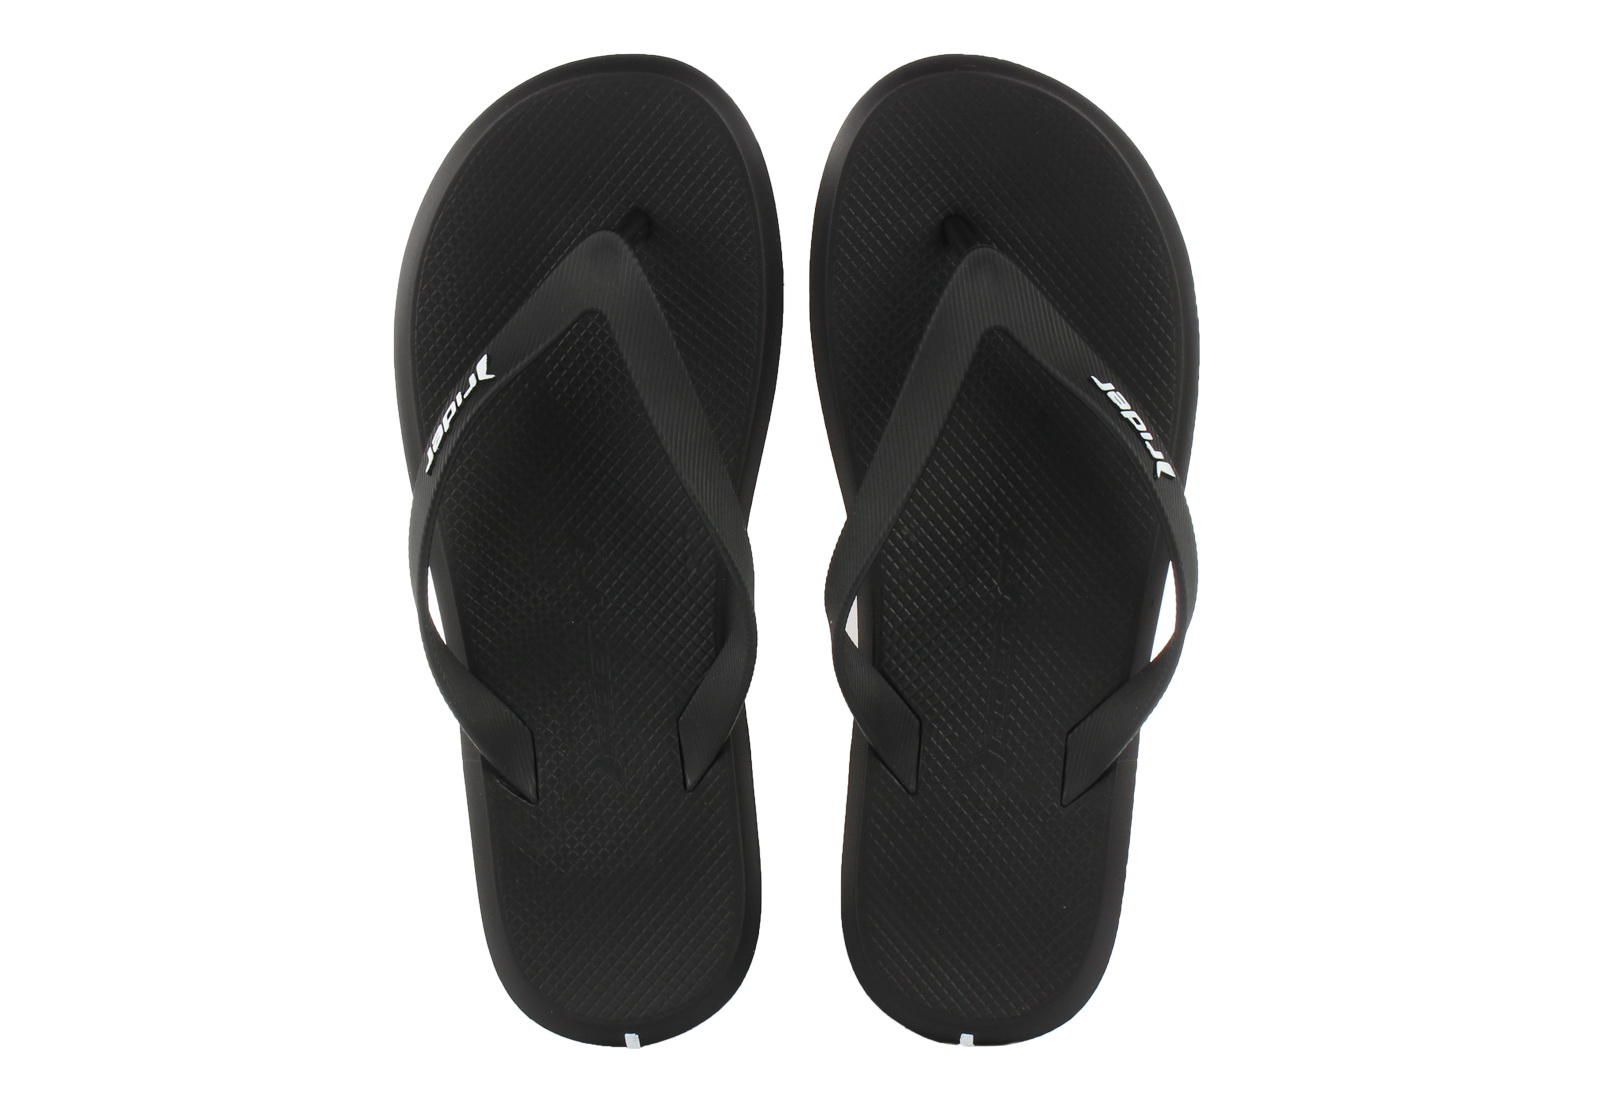 Rider Slippers - R1 Speed - 11650-20766 - Online shop for sneakers ...